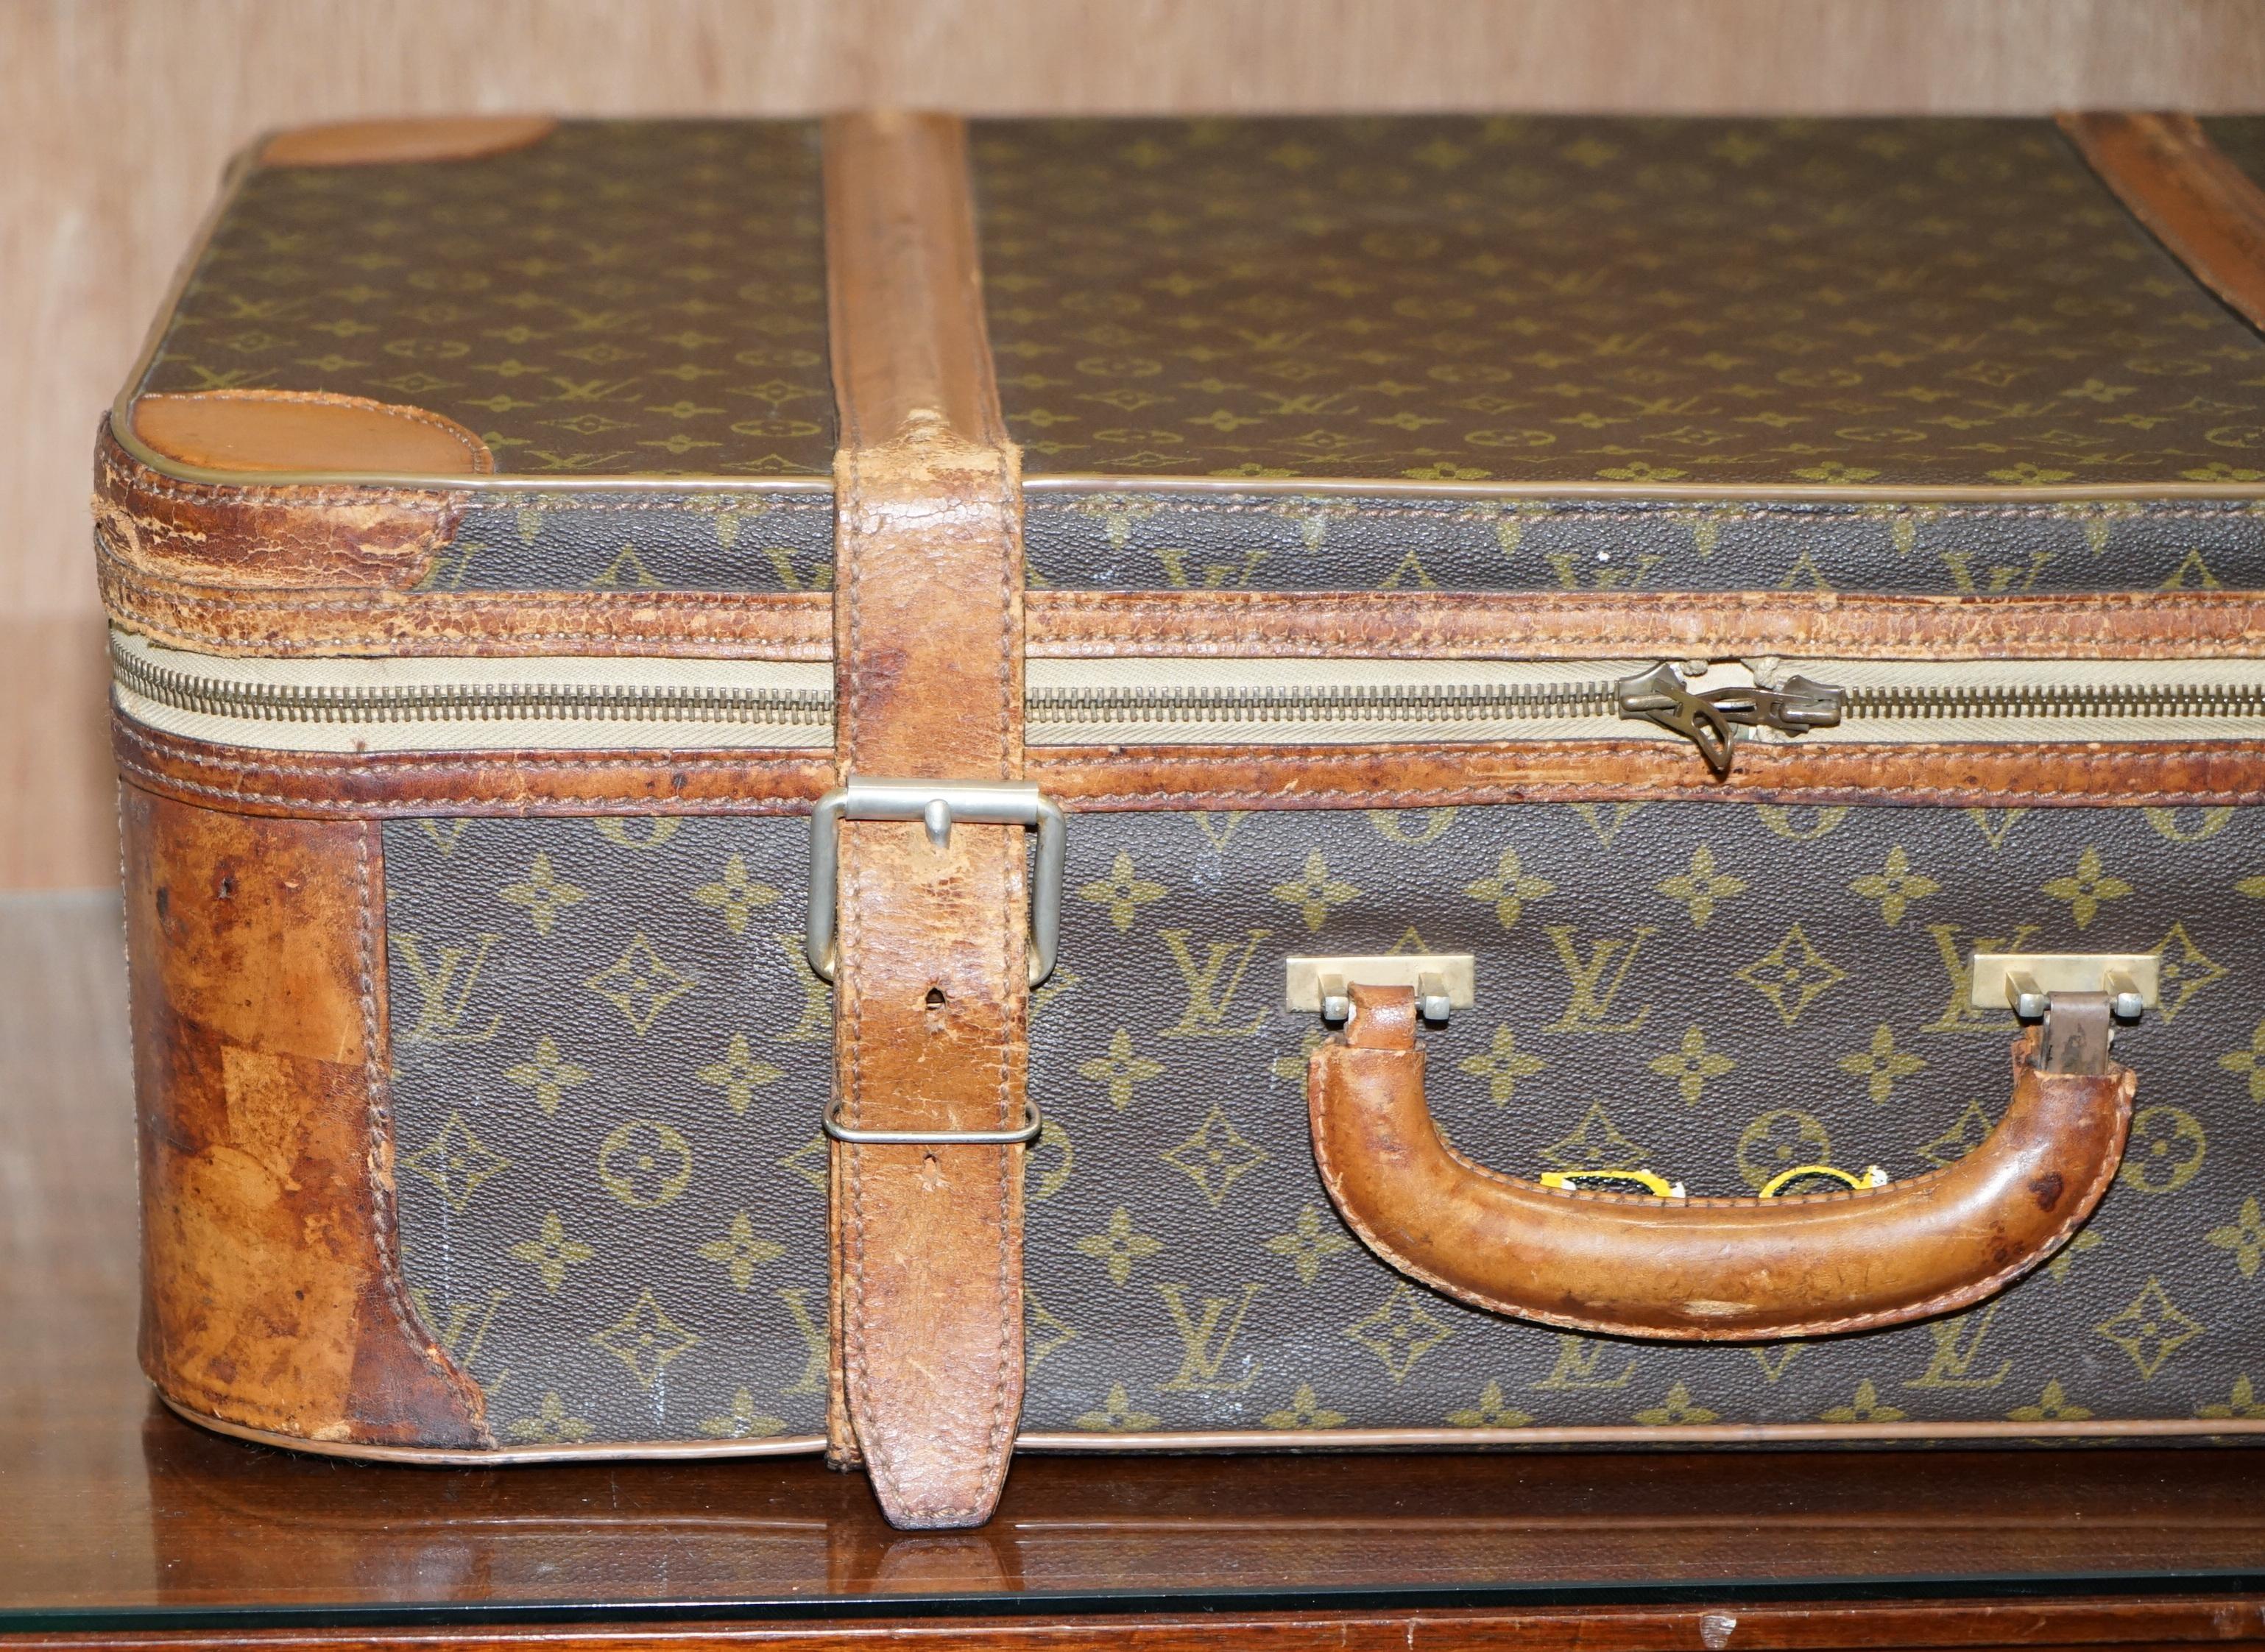 We are delighted to offer for sale 1 of 2 original vintage brown leather strapped Louis Vuitton suitcases with original bronze buckles

This listing is for one, the other is listed under my other items

A very good looking and well made piece,